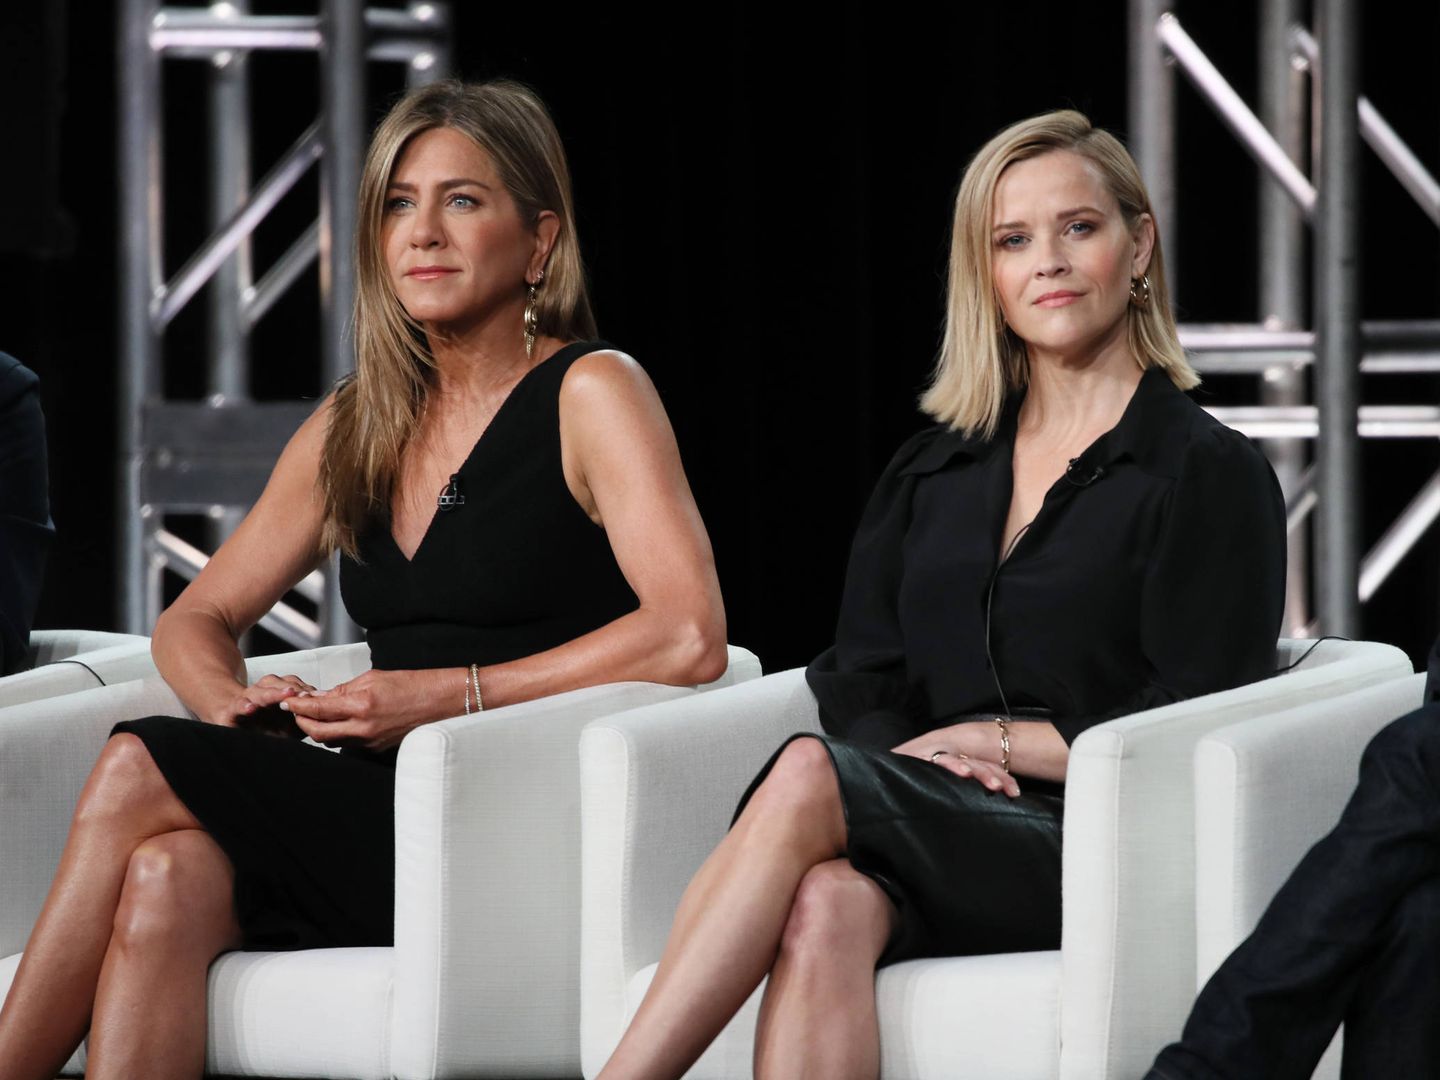  Jennifer Aniston y Reese Witherspoon. (Getty)